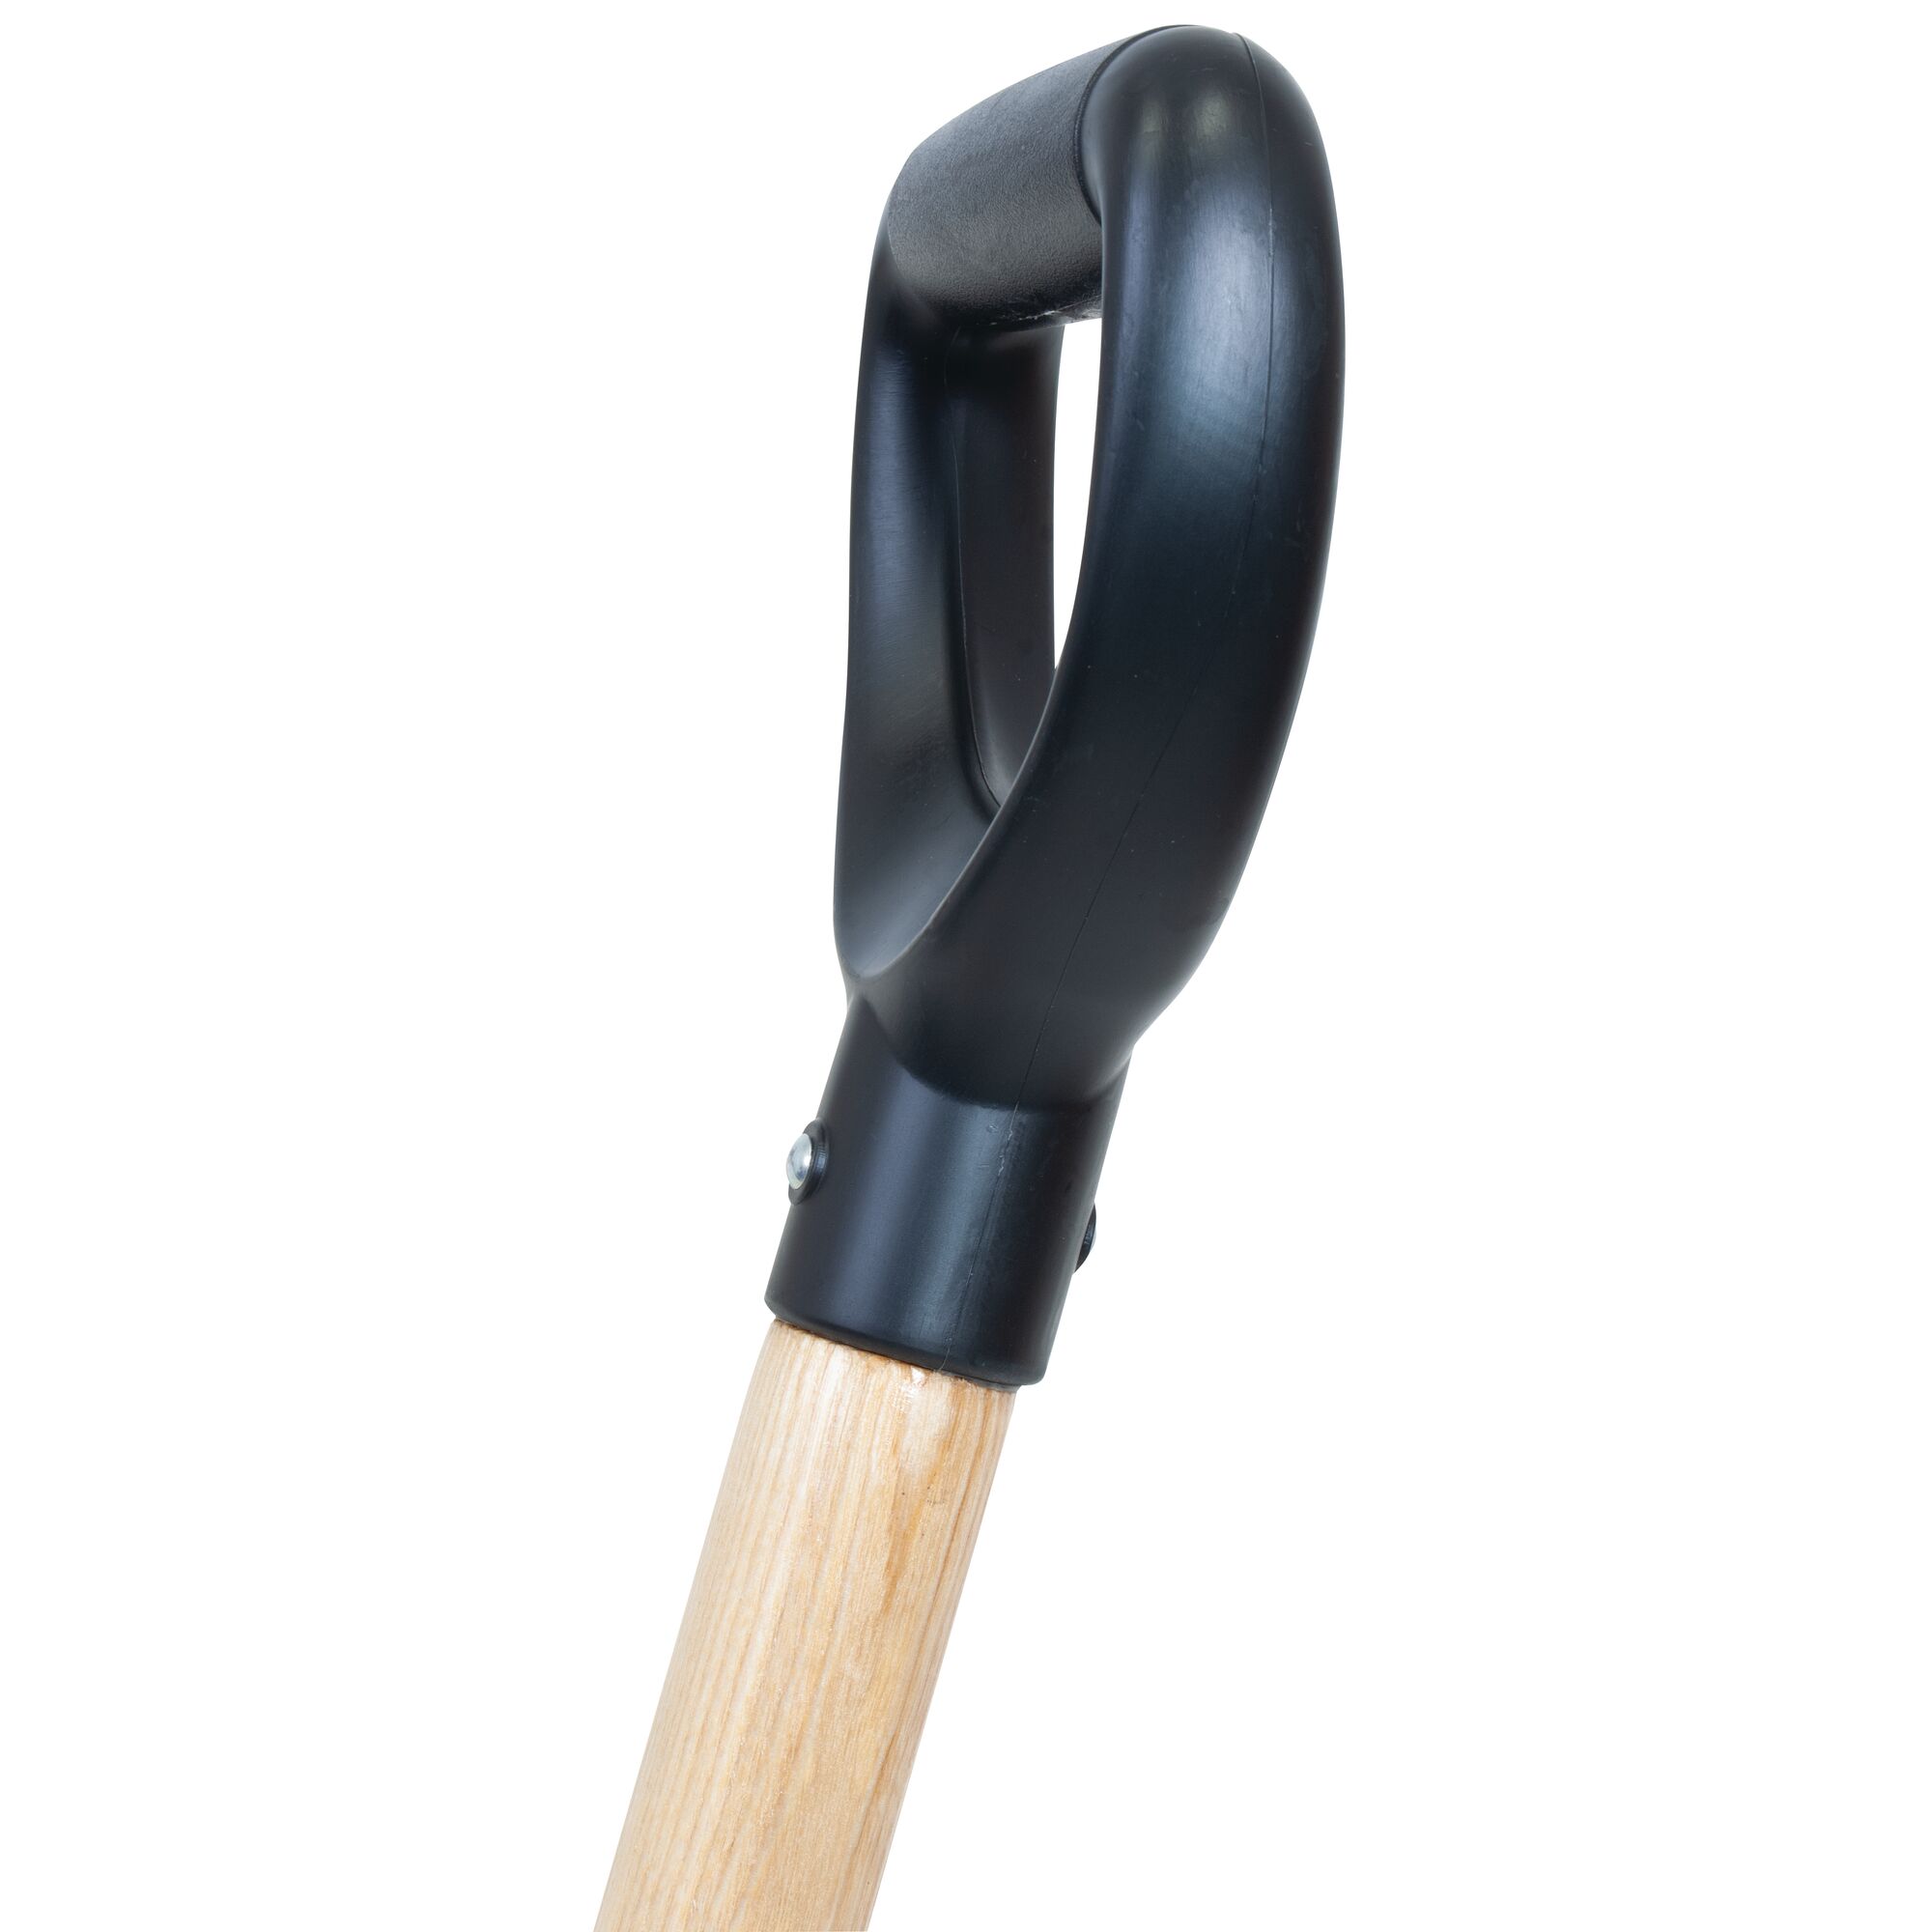 Comfortable handle grip feature of a wood handle digging shovel.